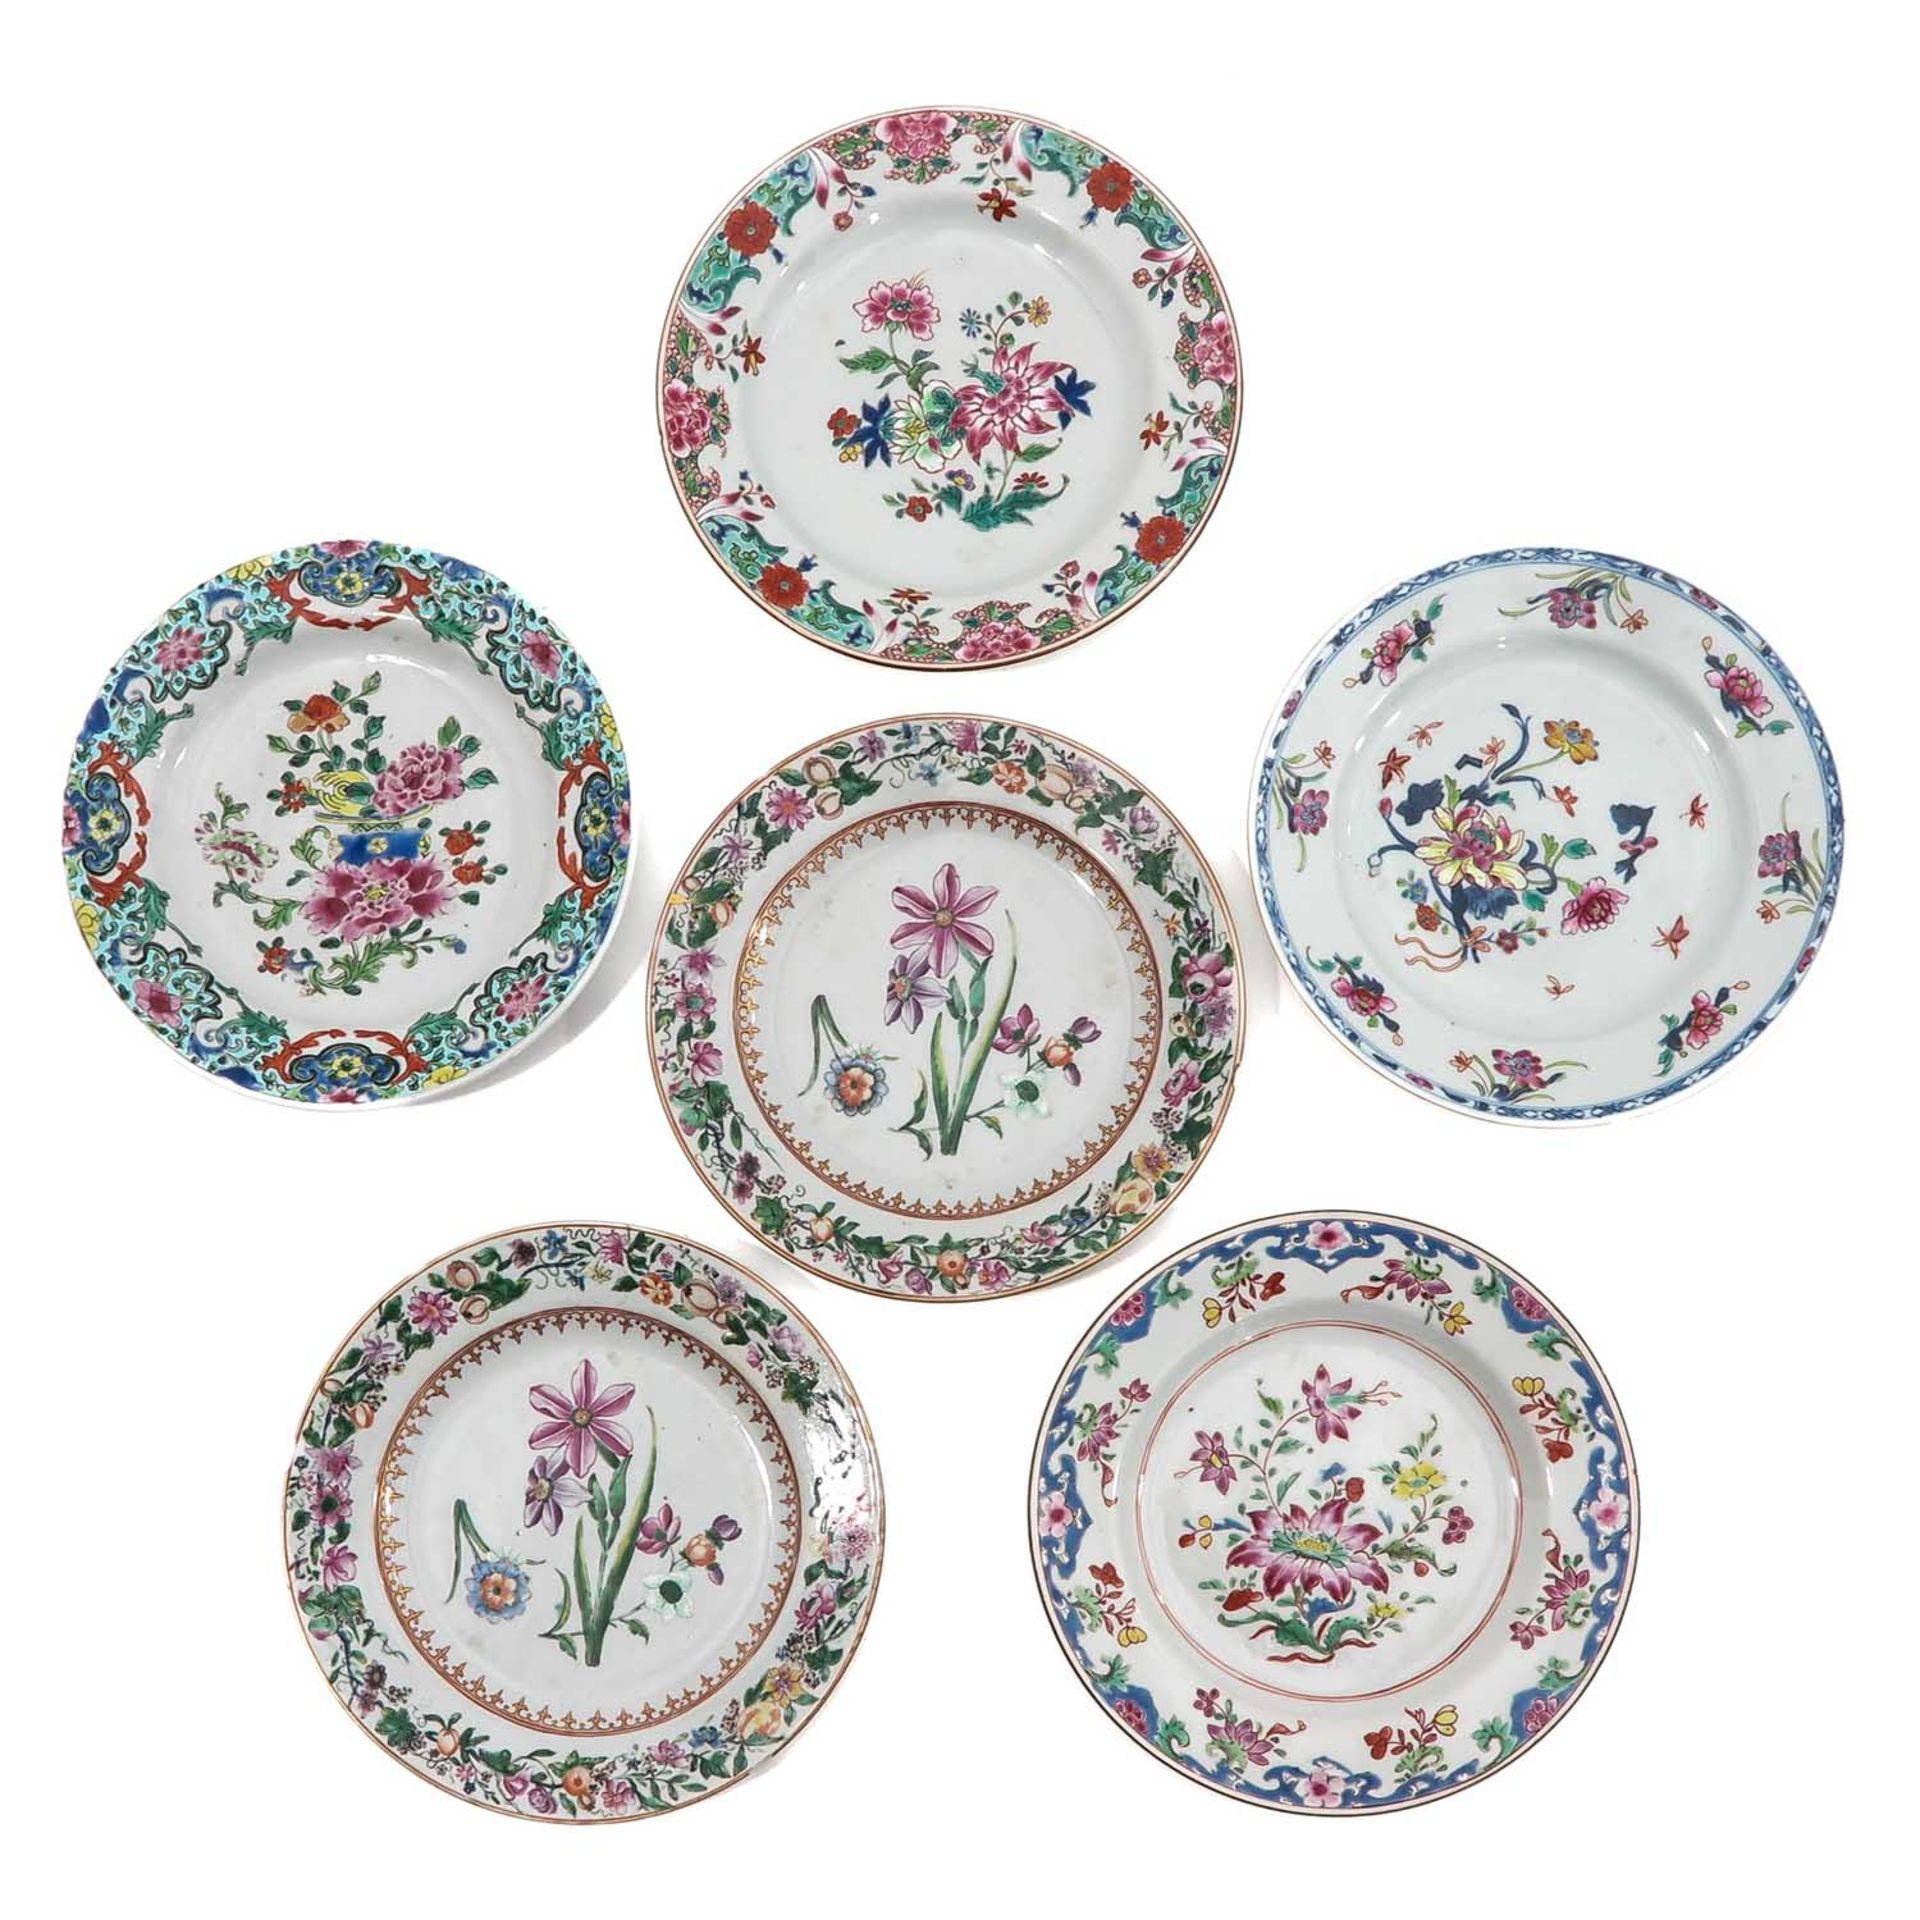 A Collection of 6 Plates